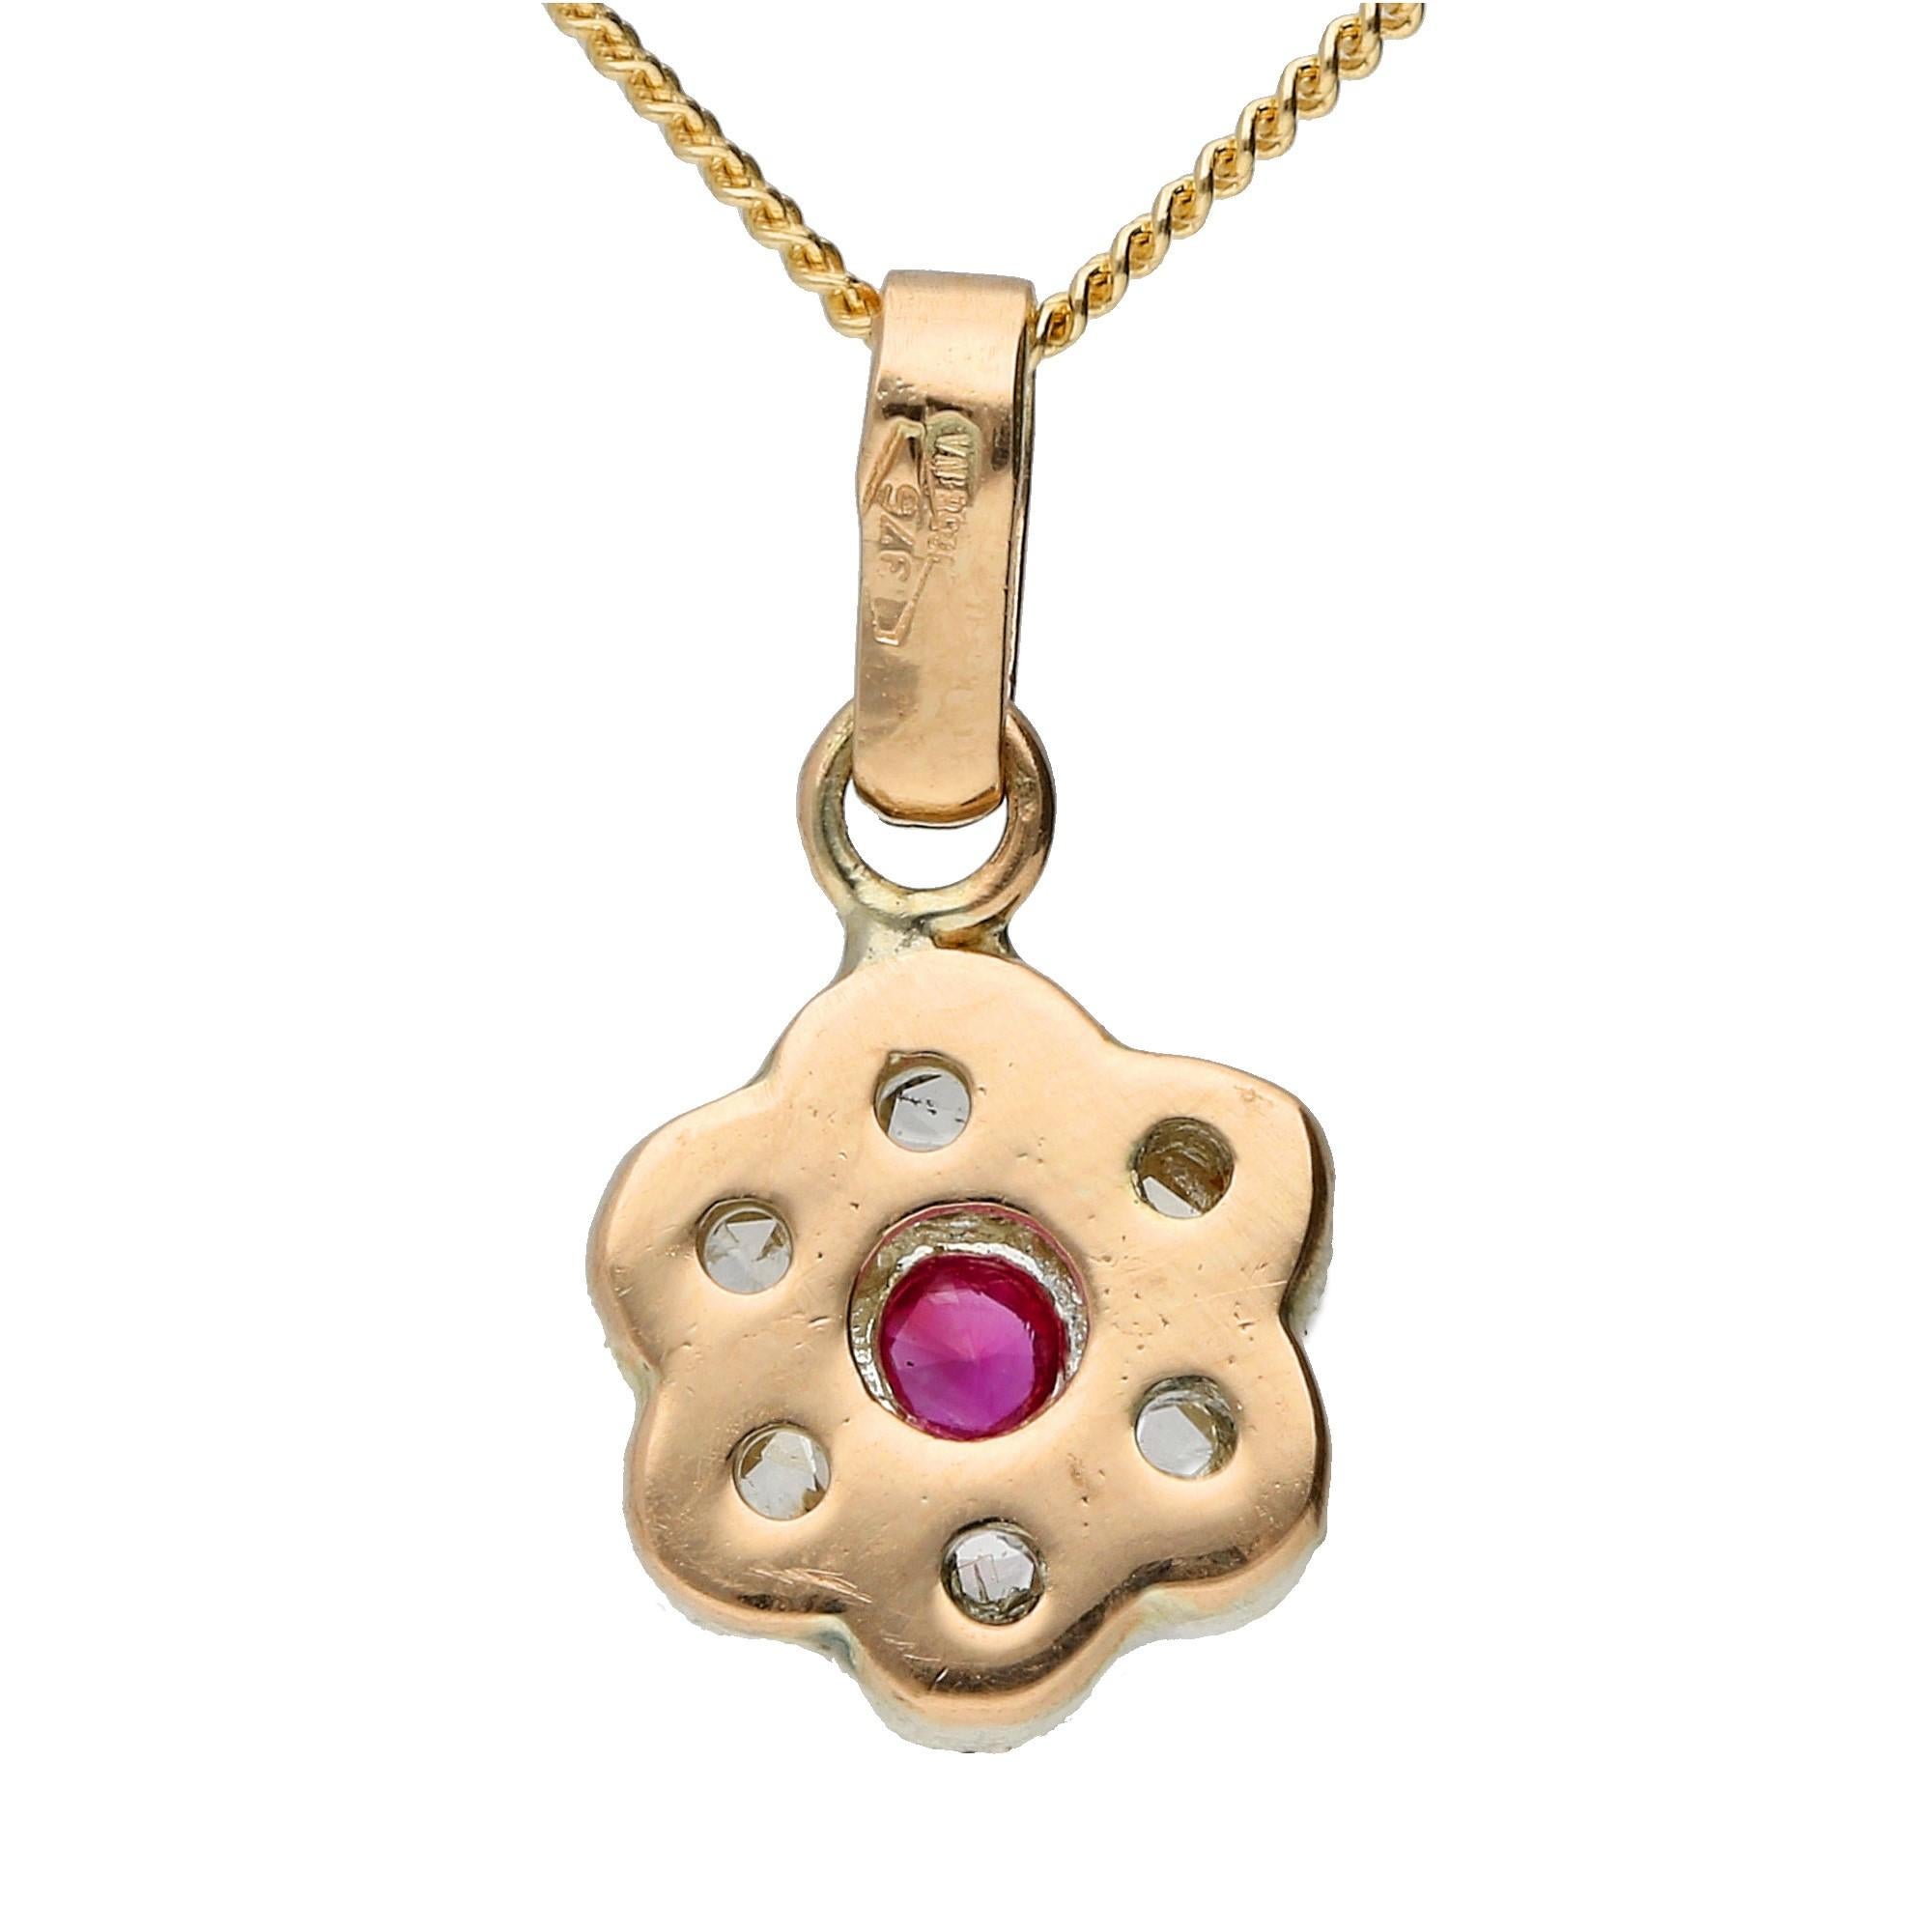 DESCRIPTION
This beautifully crafted ladies ruby and diamond daisy pendant, handcrafted by third generation Italian goldsmiths in Naples, Italy.

A petite and pretty pendant, that features both vibrant colour and delicious sparkle. The perfect gift